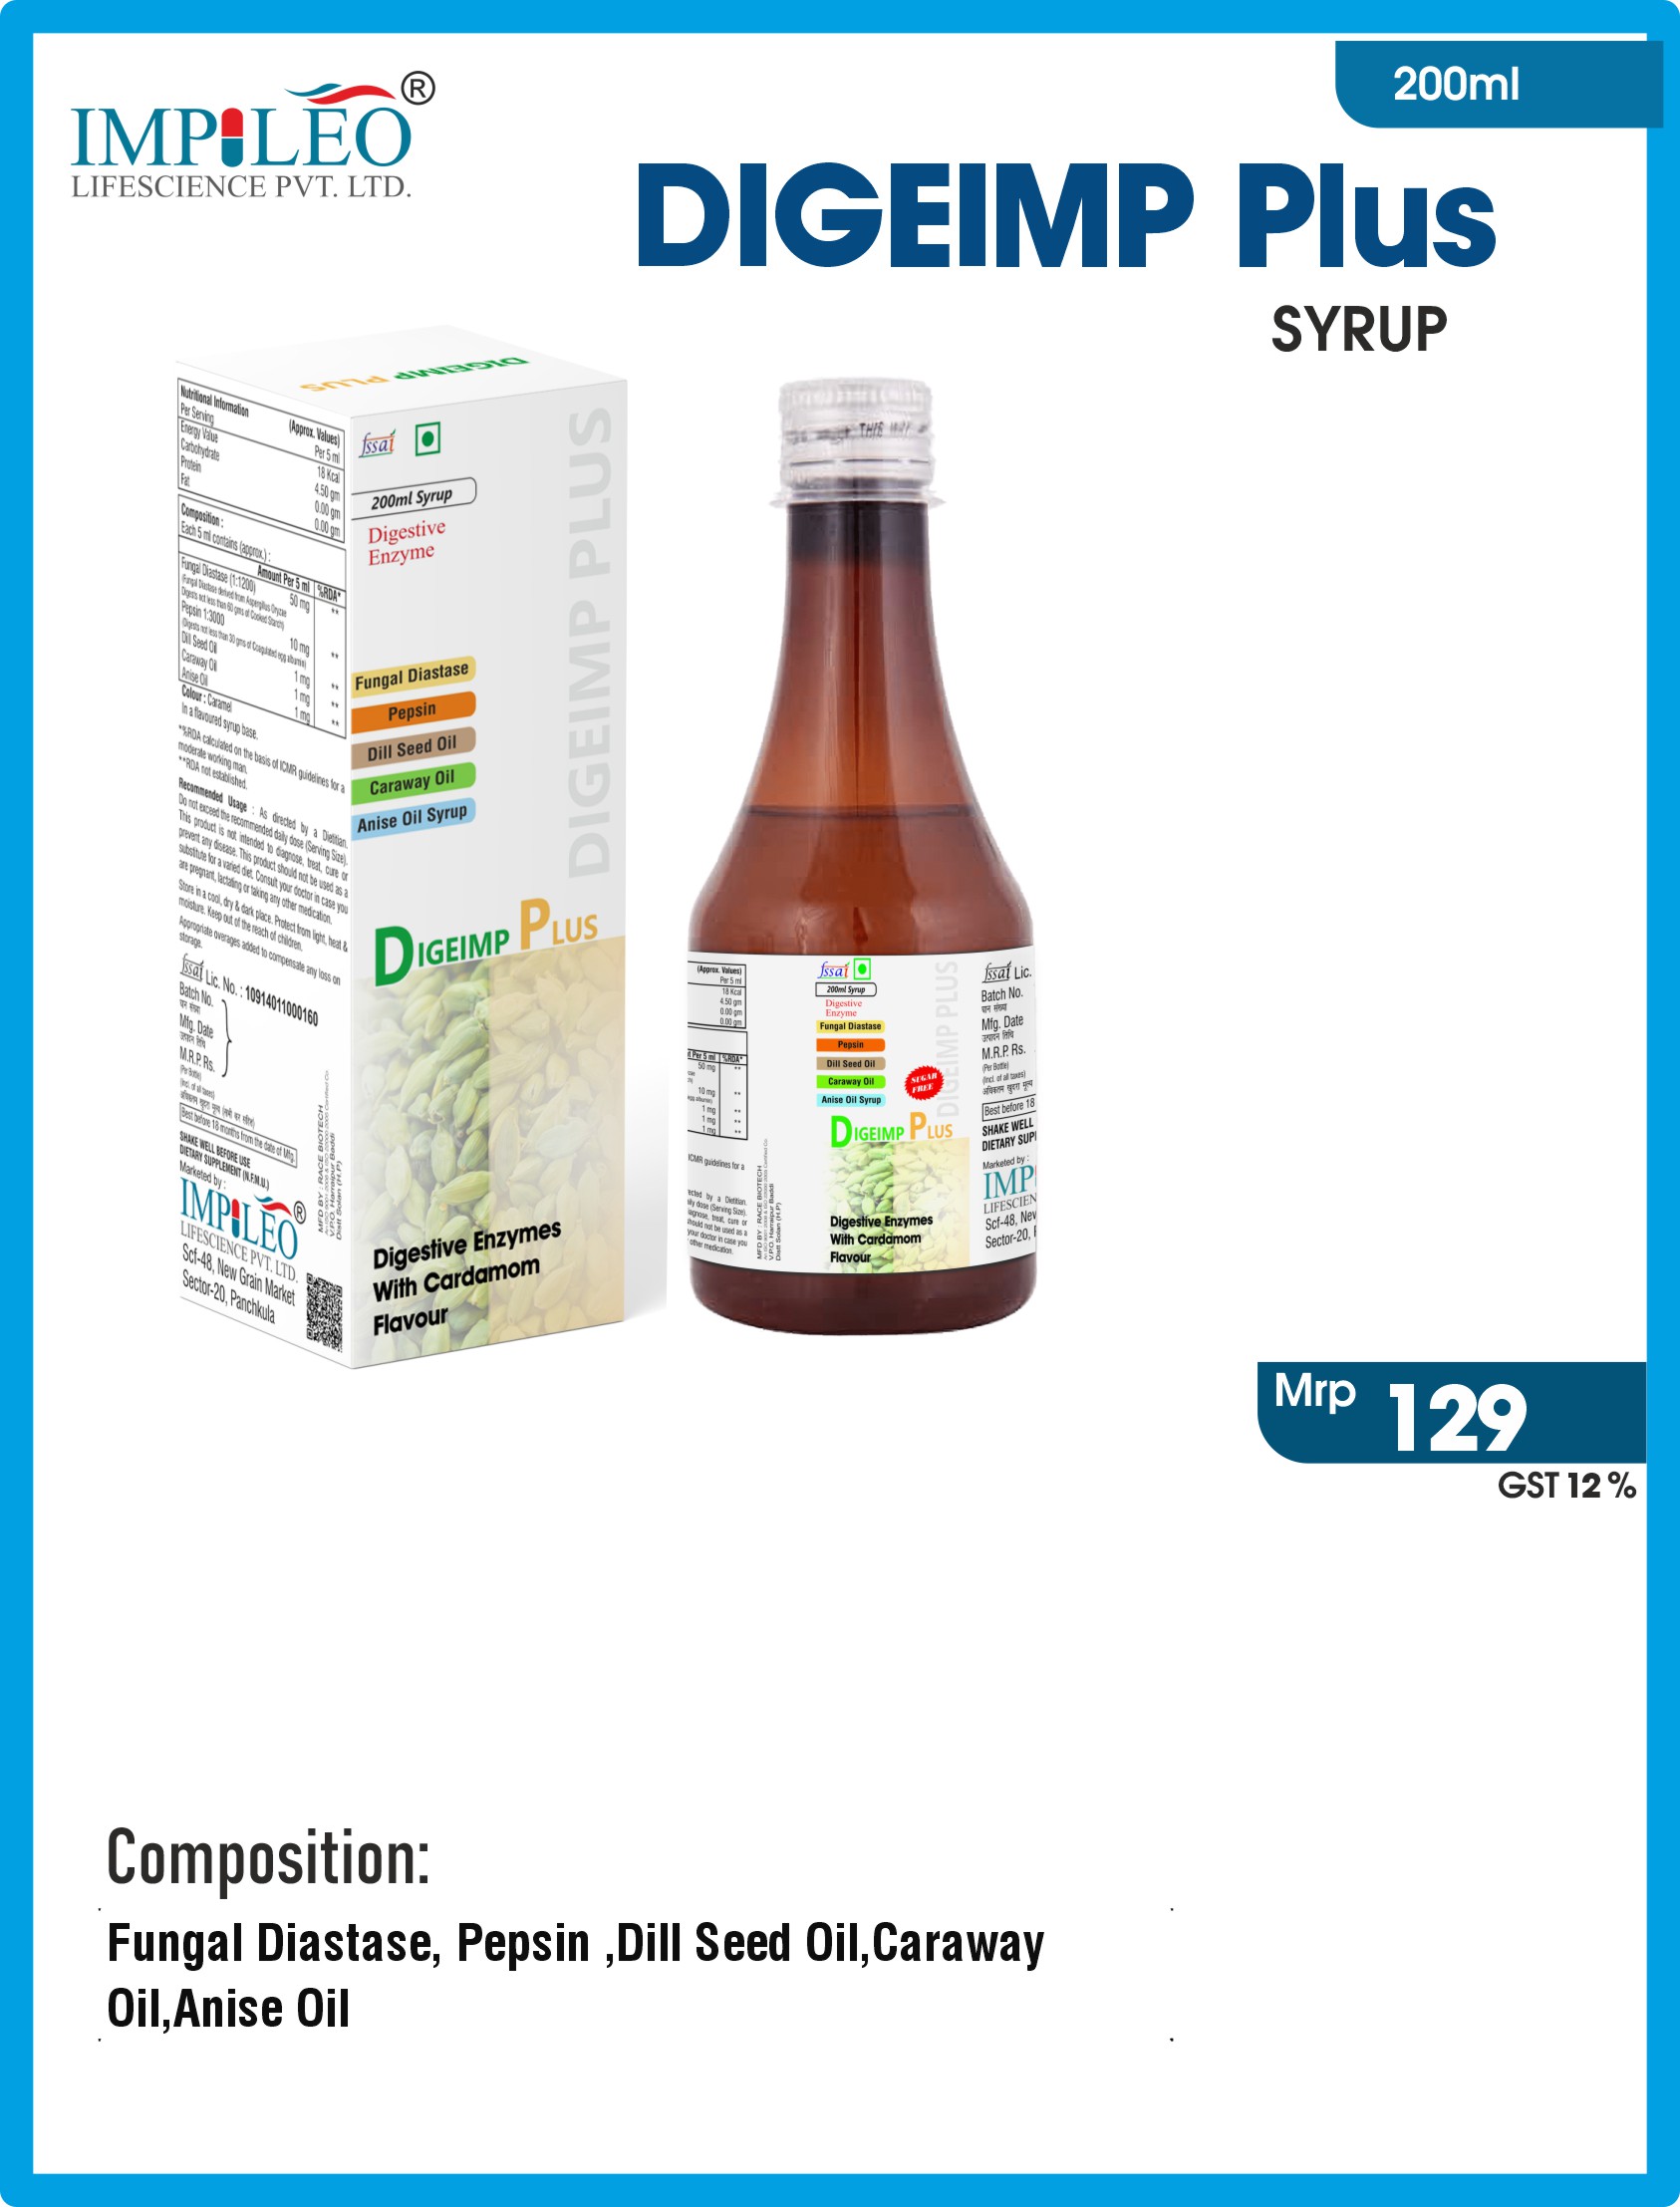 DIGEIMP PLUS SUGAR FREE SYRUP: Enhanced Digestive Support by Premier PCD Pharma Franchise in Chandigarh